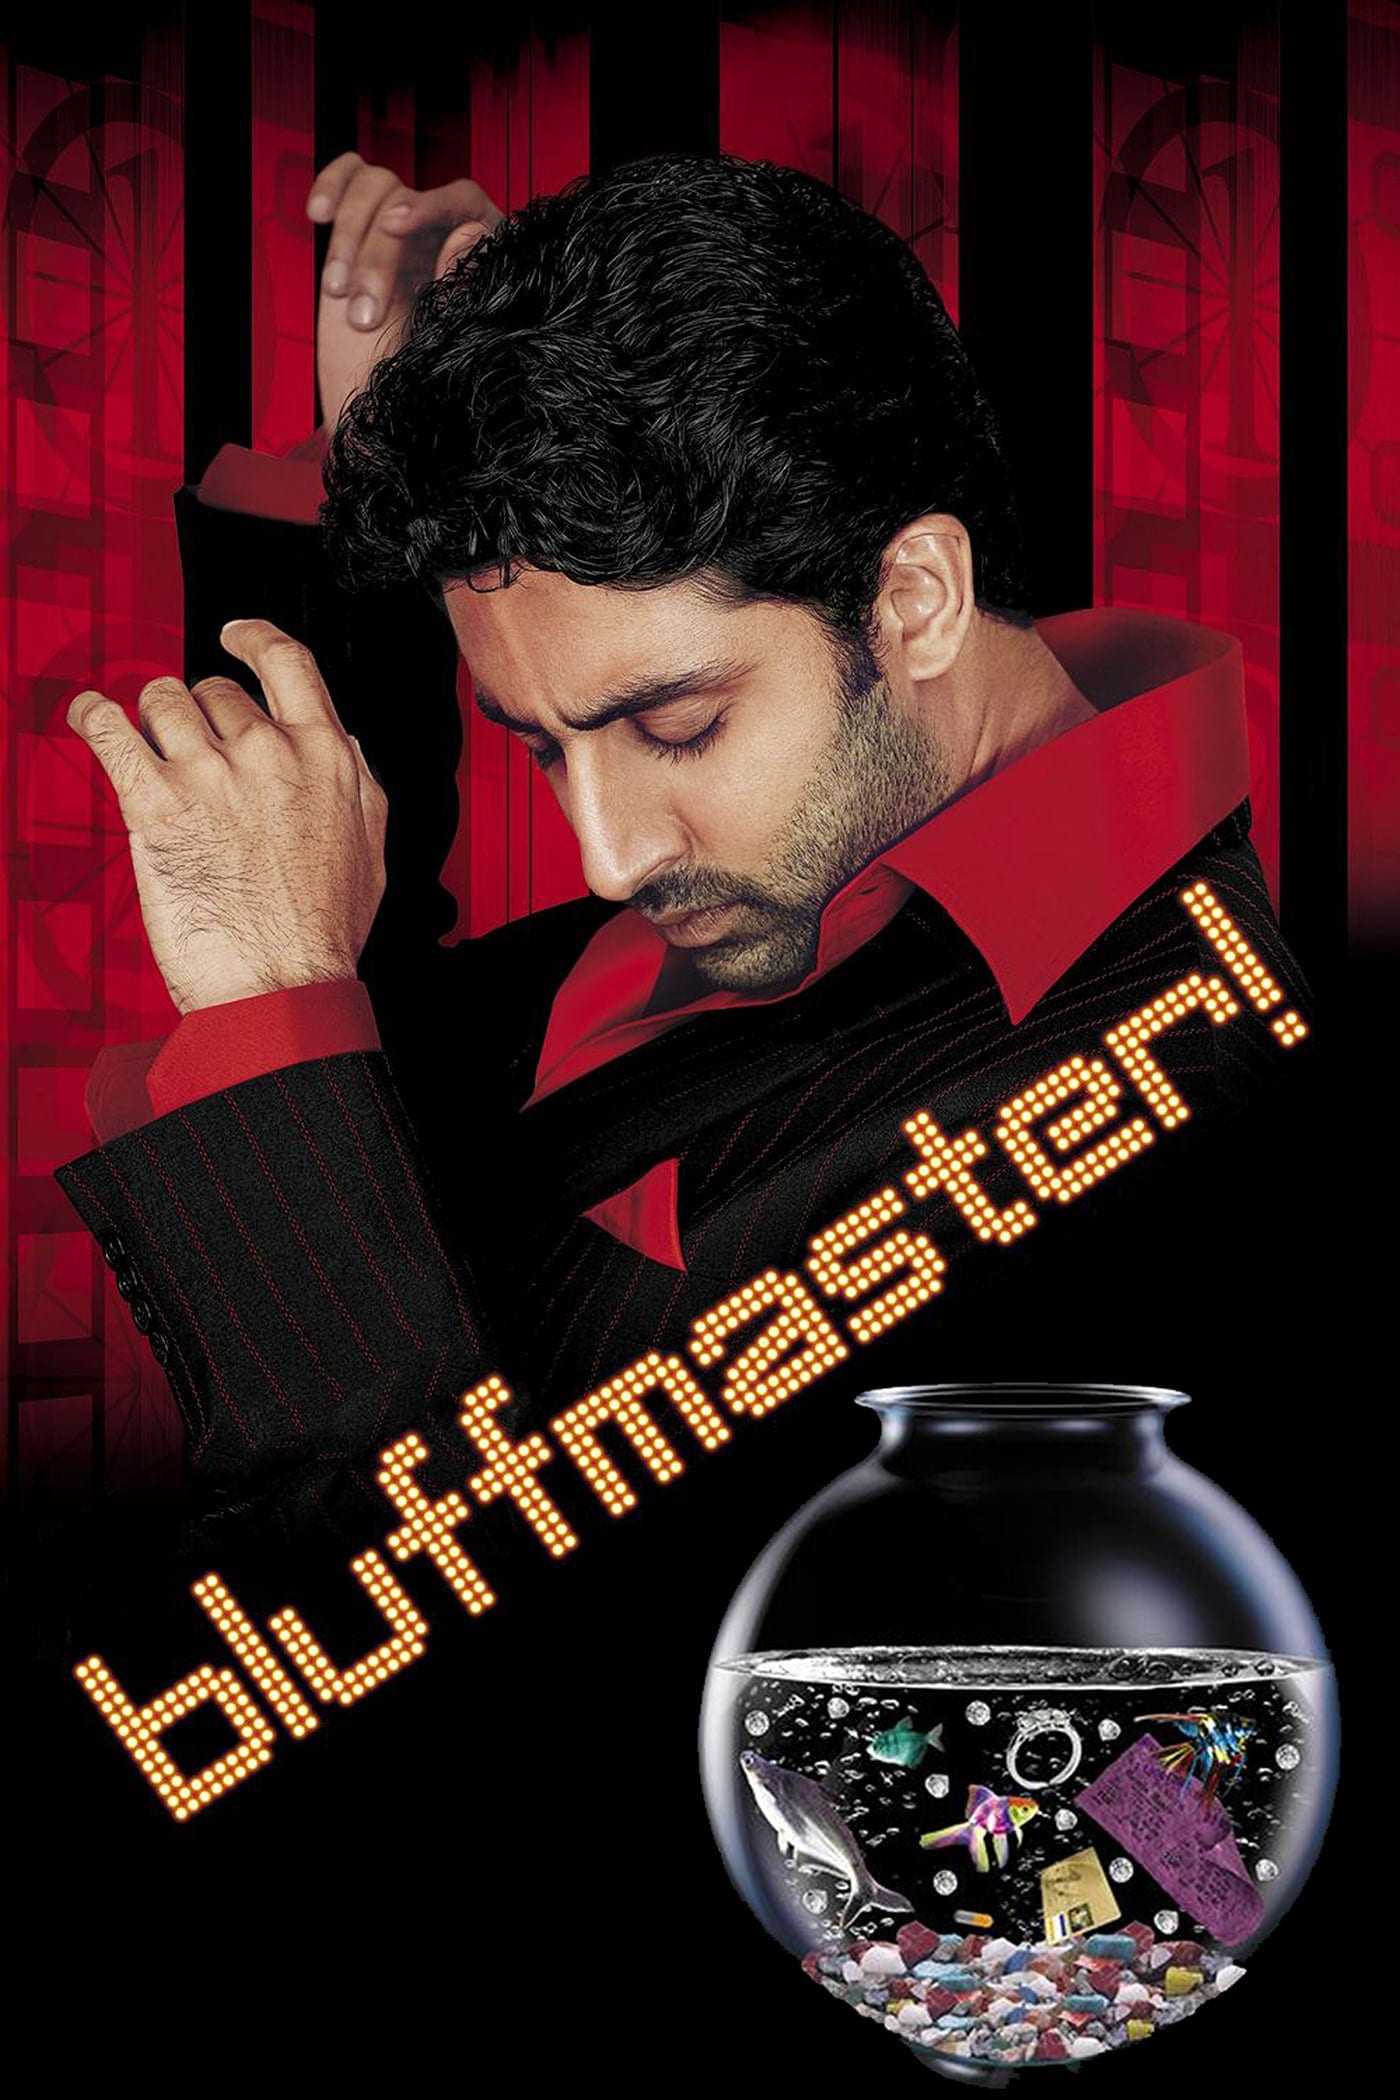 Poster for the movie "Bluffmaster!"